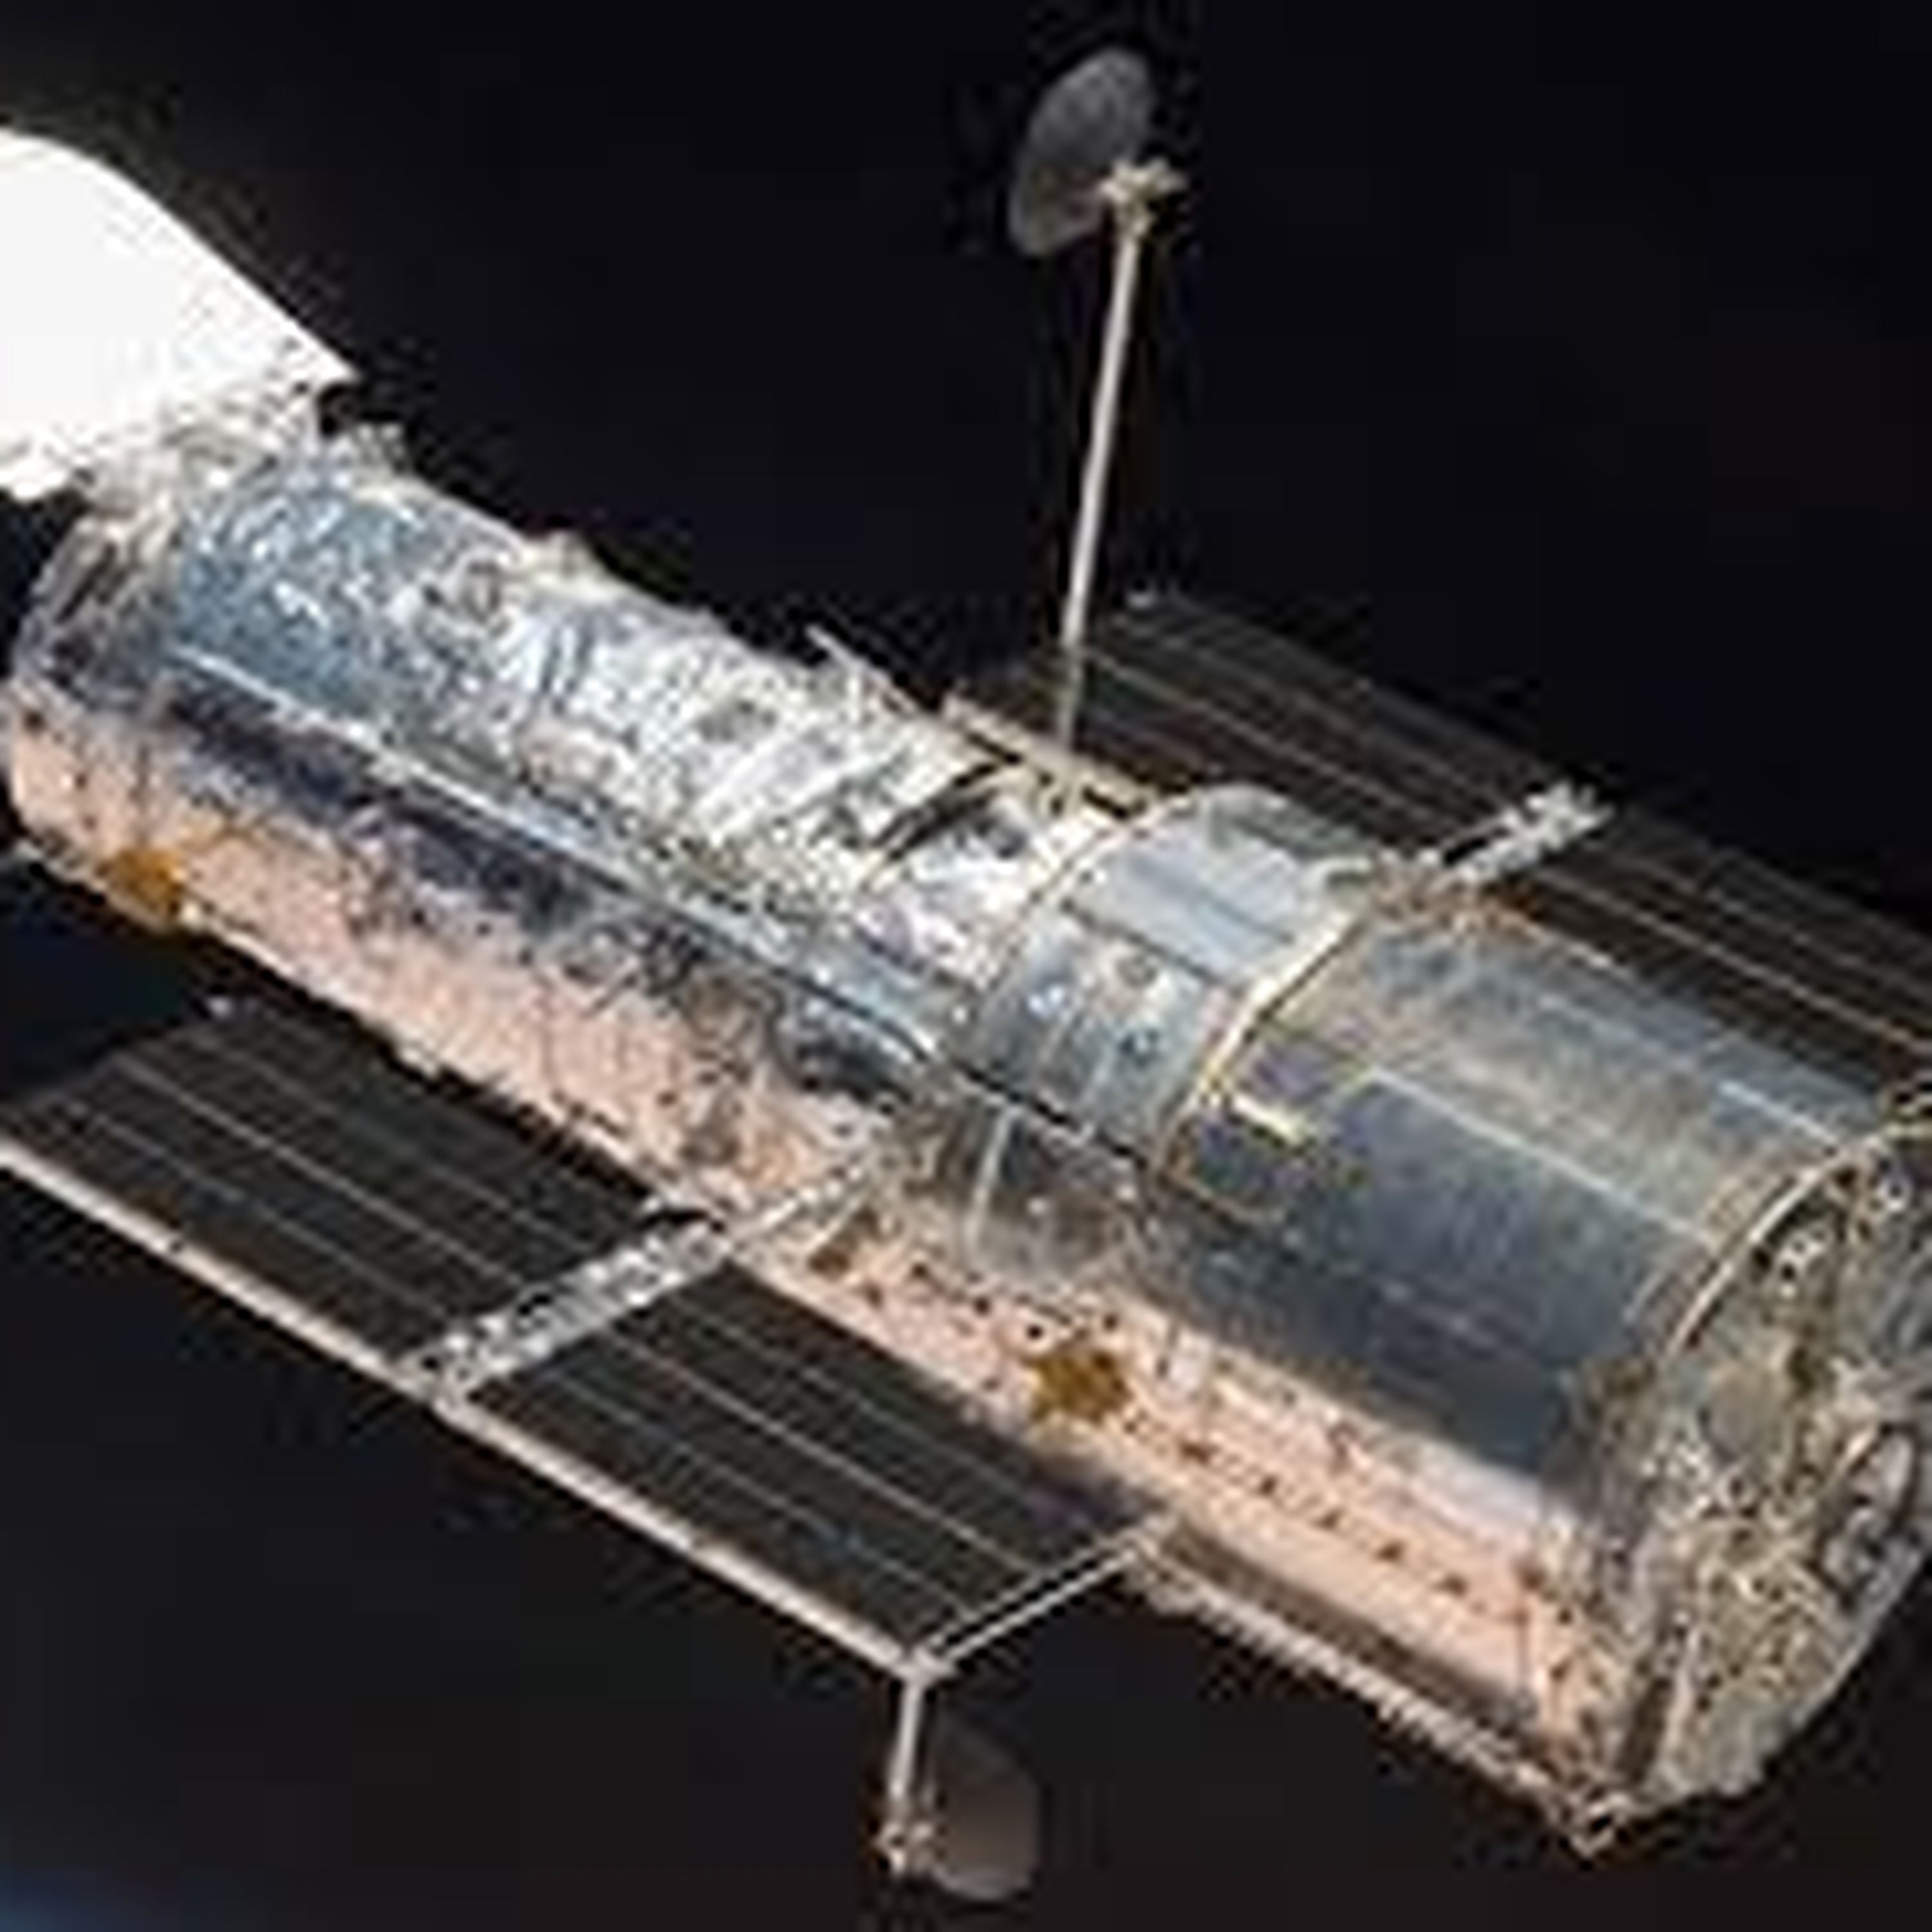 11: Space Nuts Ep.9 - The Hubble Telescope does it again...